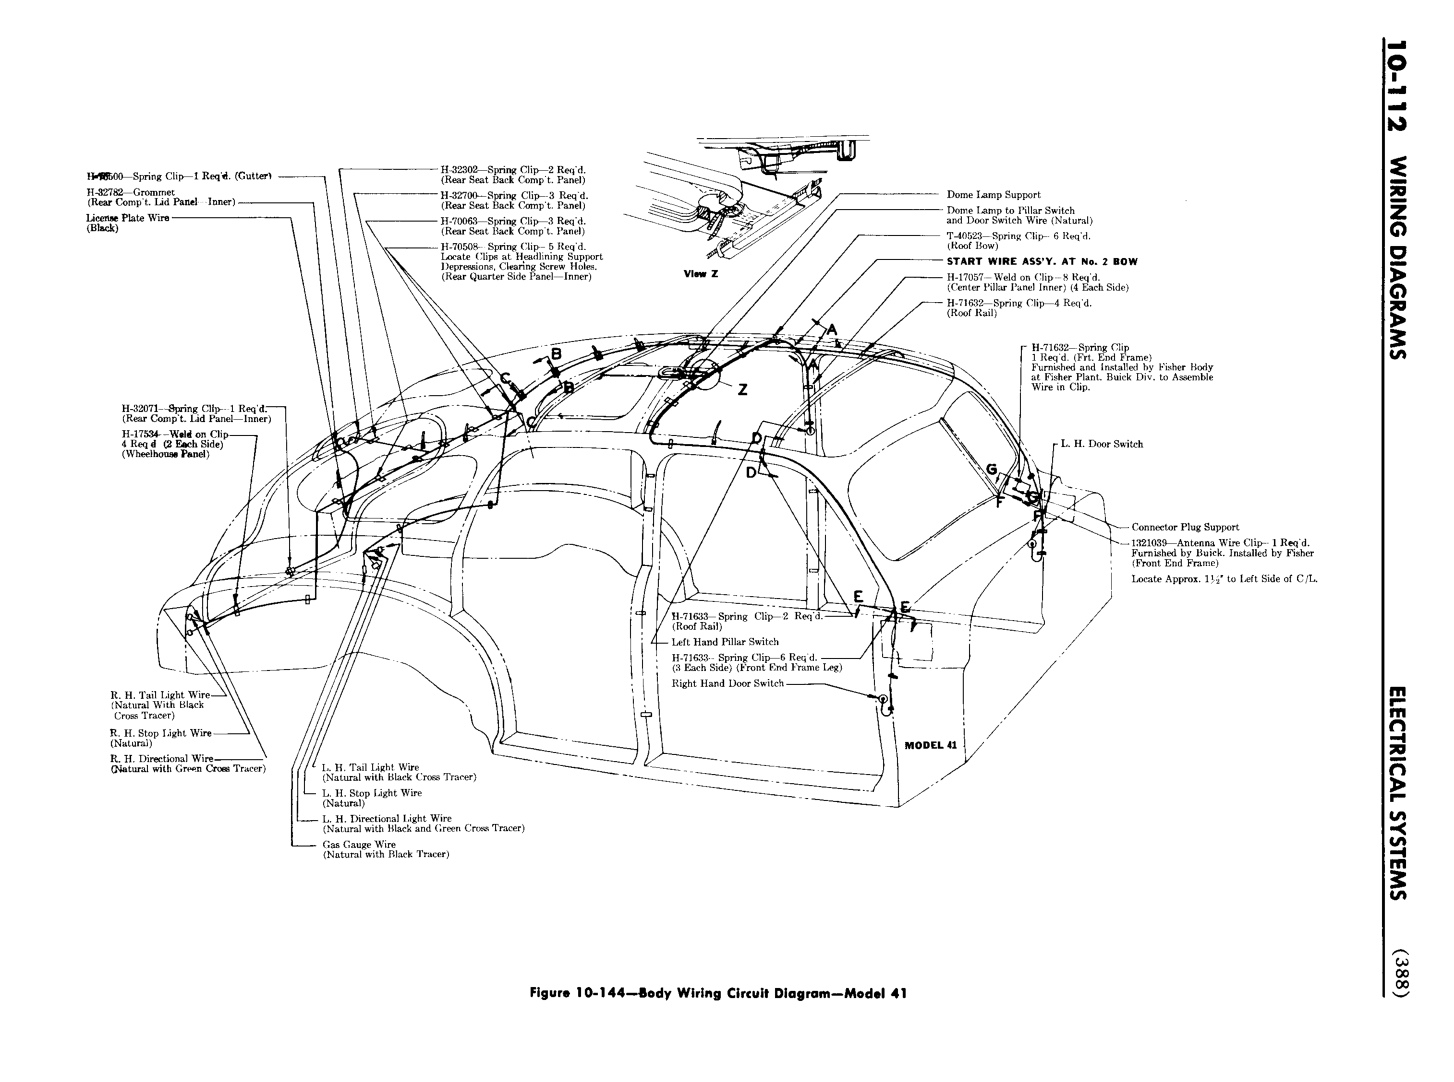 n_11 1948 Buick Shop Manual - Electrical Systems-112-112.jpg